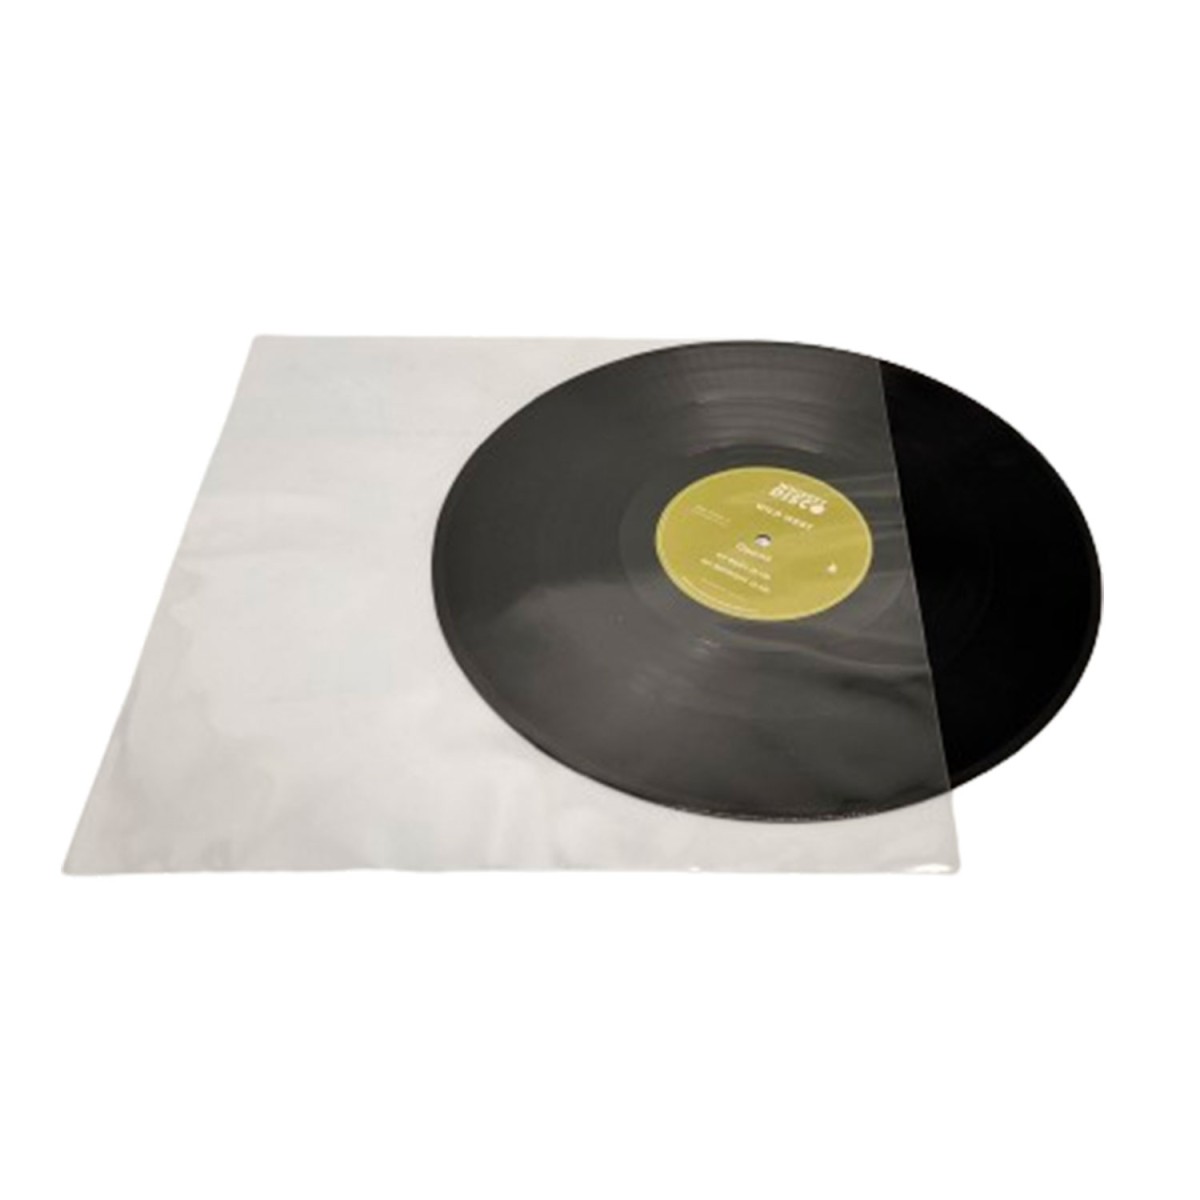 Simply Analog Crystal Clear PP (Polypropylene) Outer Sleeves for 12" Vinyl Records